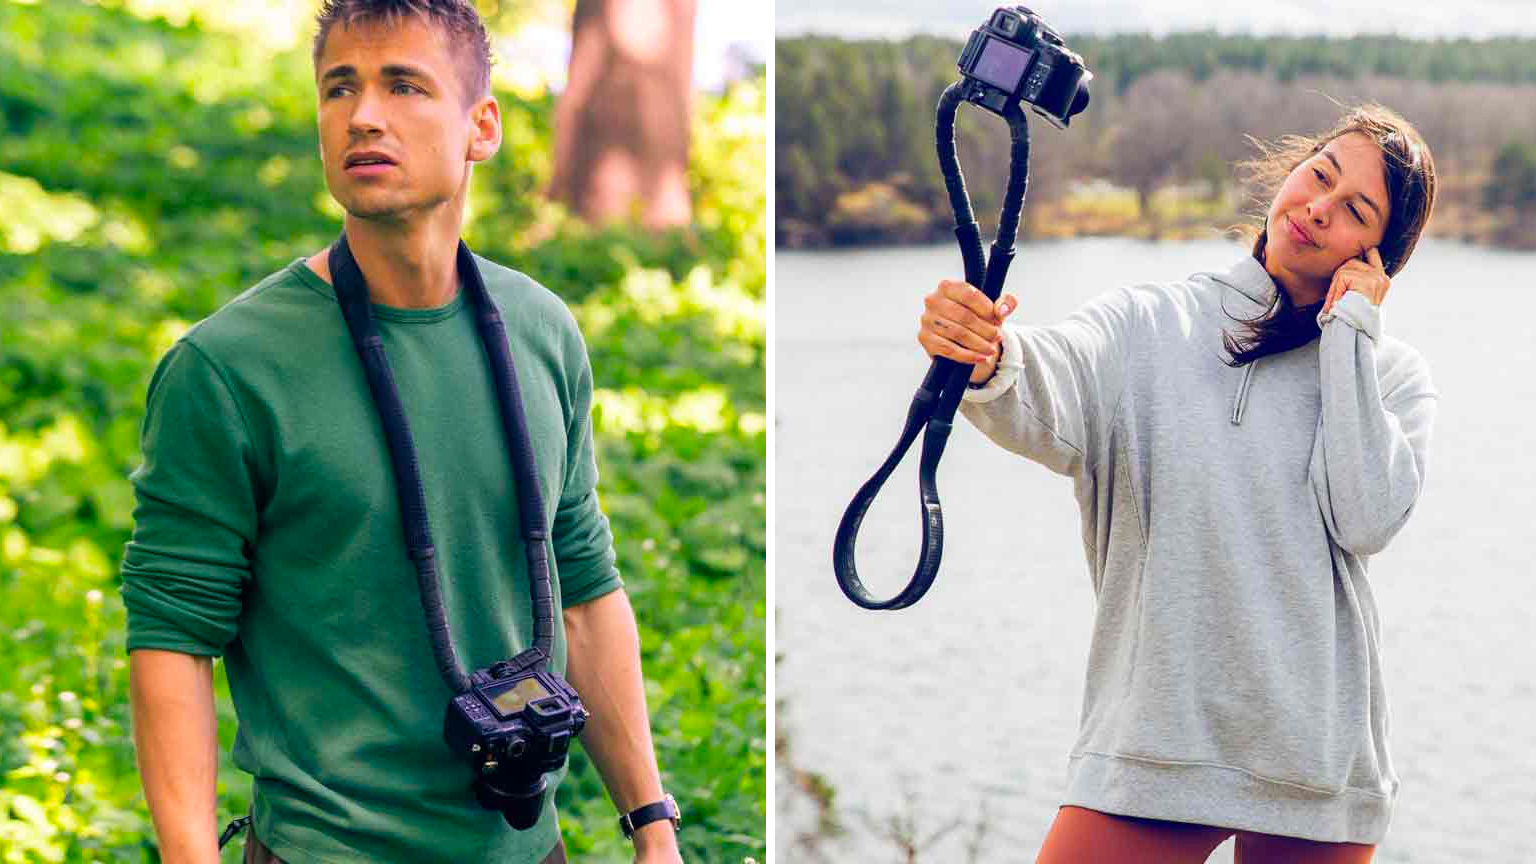 Somehow This Flexible Camera Strap Turns Into a Rigid Camera Support at the Flip of a Switch